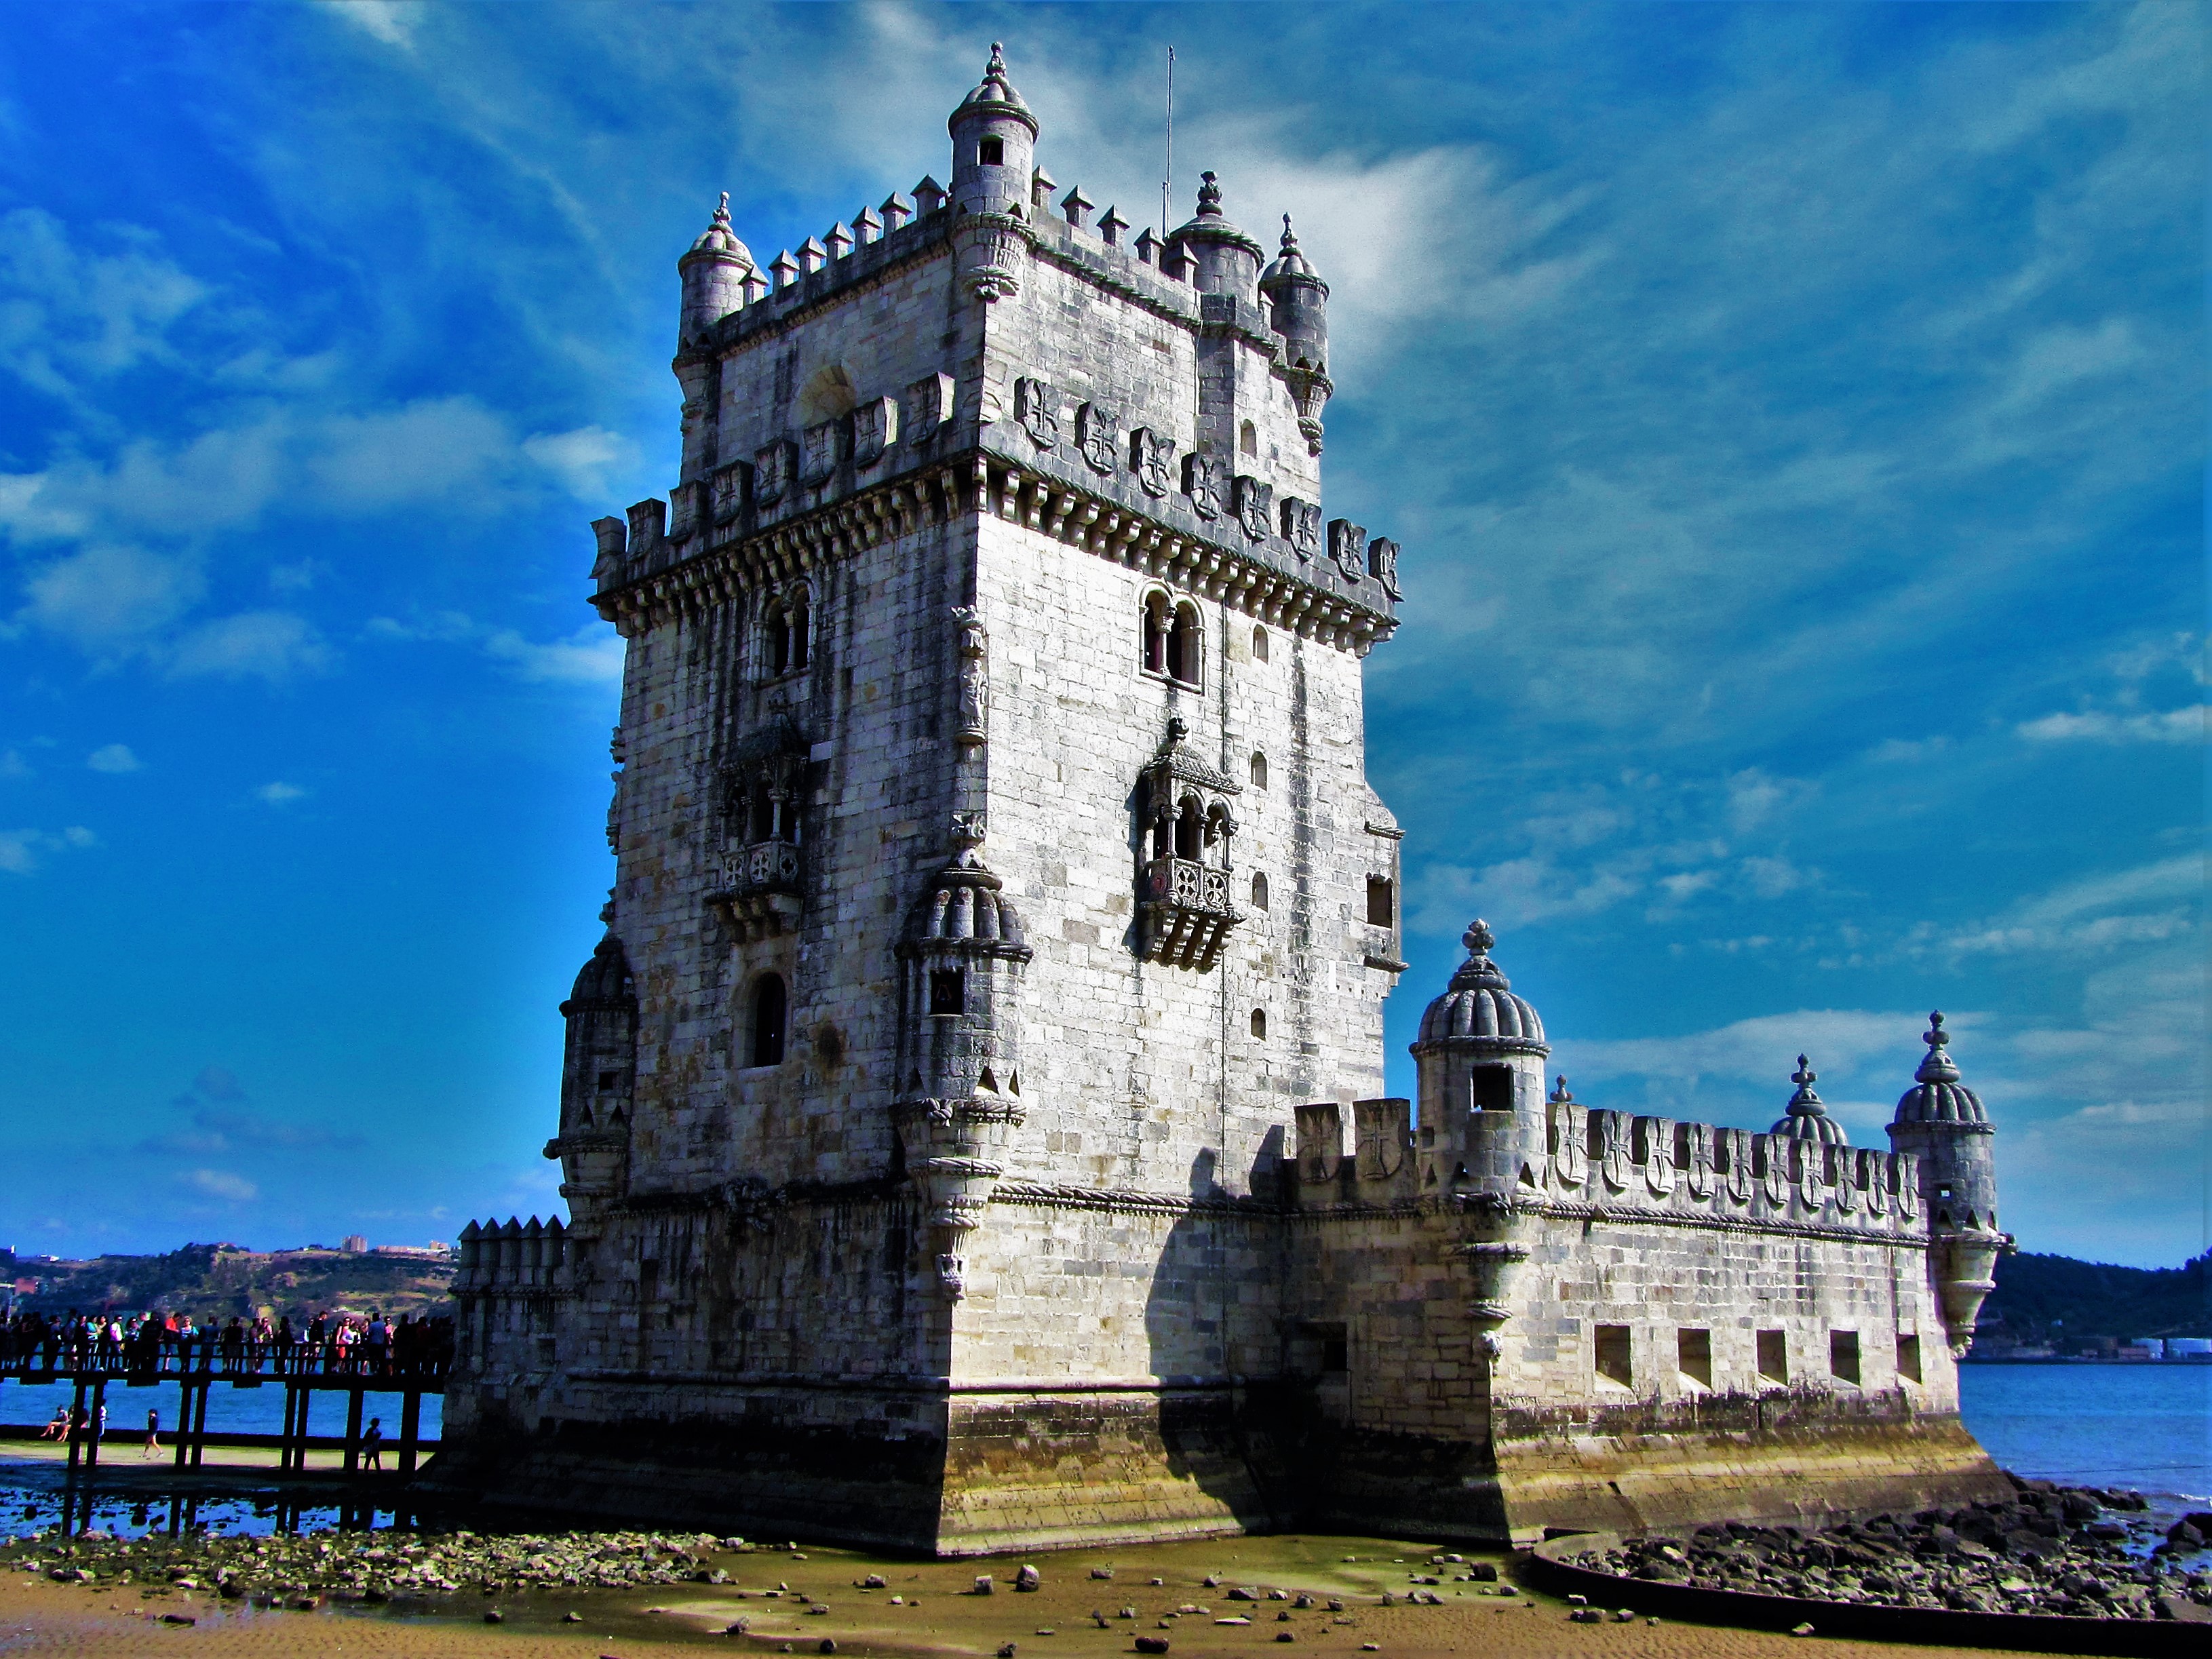 Planning a visit to Portugal? Don’t forget to visit these places